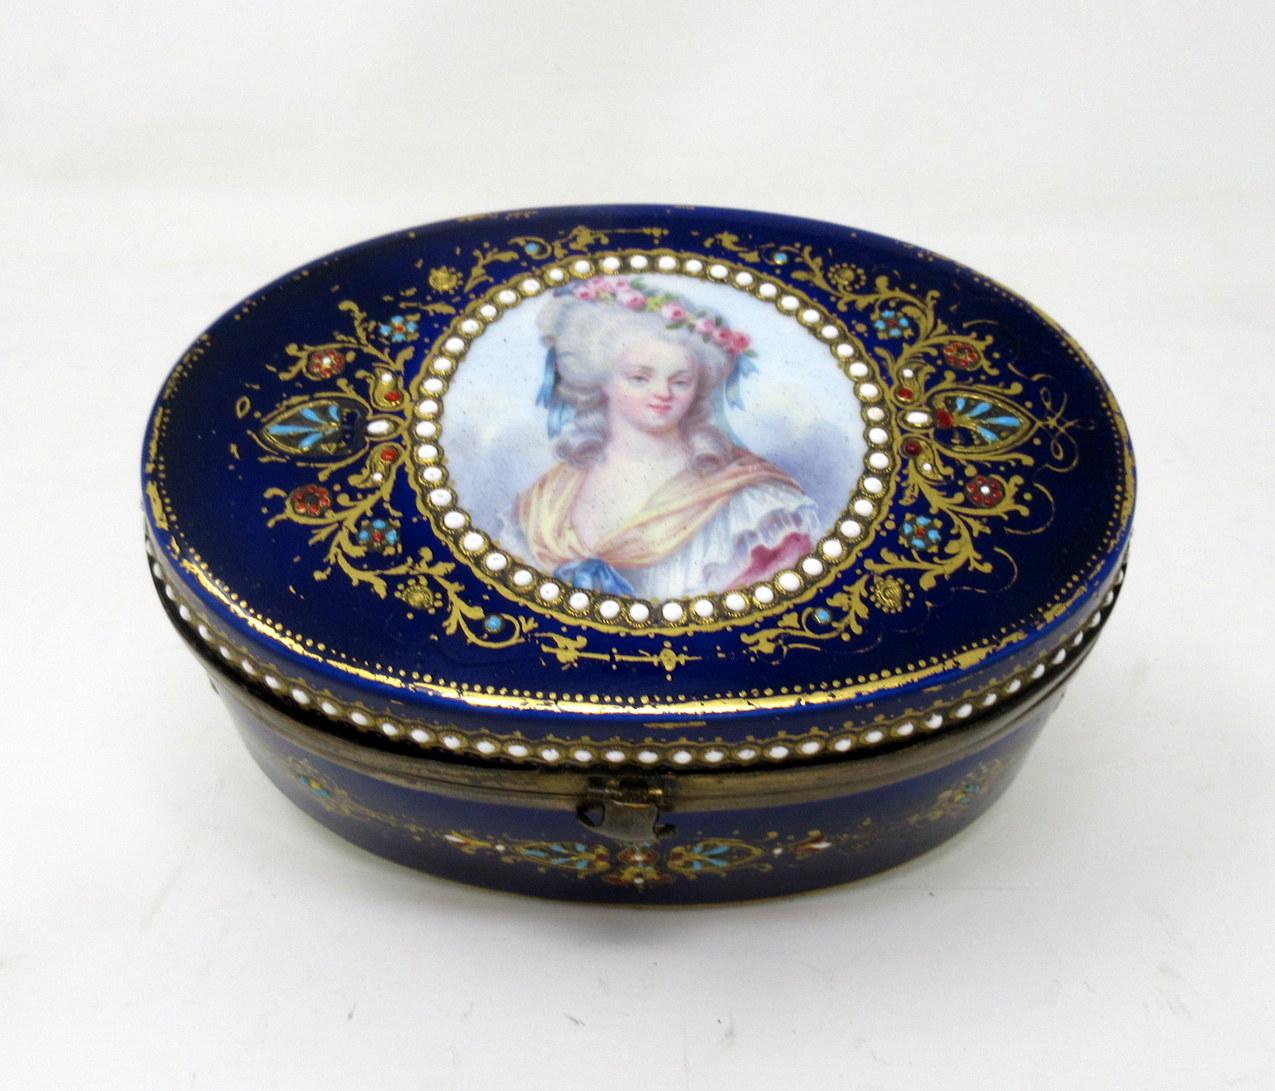 A very fine quality French Sevres hand decorated signed ladies jewlery casket or dresser box of outstanding museum quality and of oval outline, mid-late 19th century. 

The oval flat hinged lid with hand painted decoration of a portrait of an